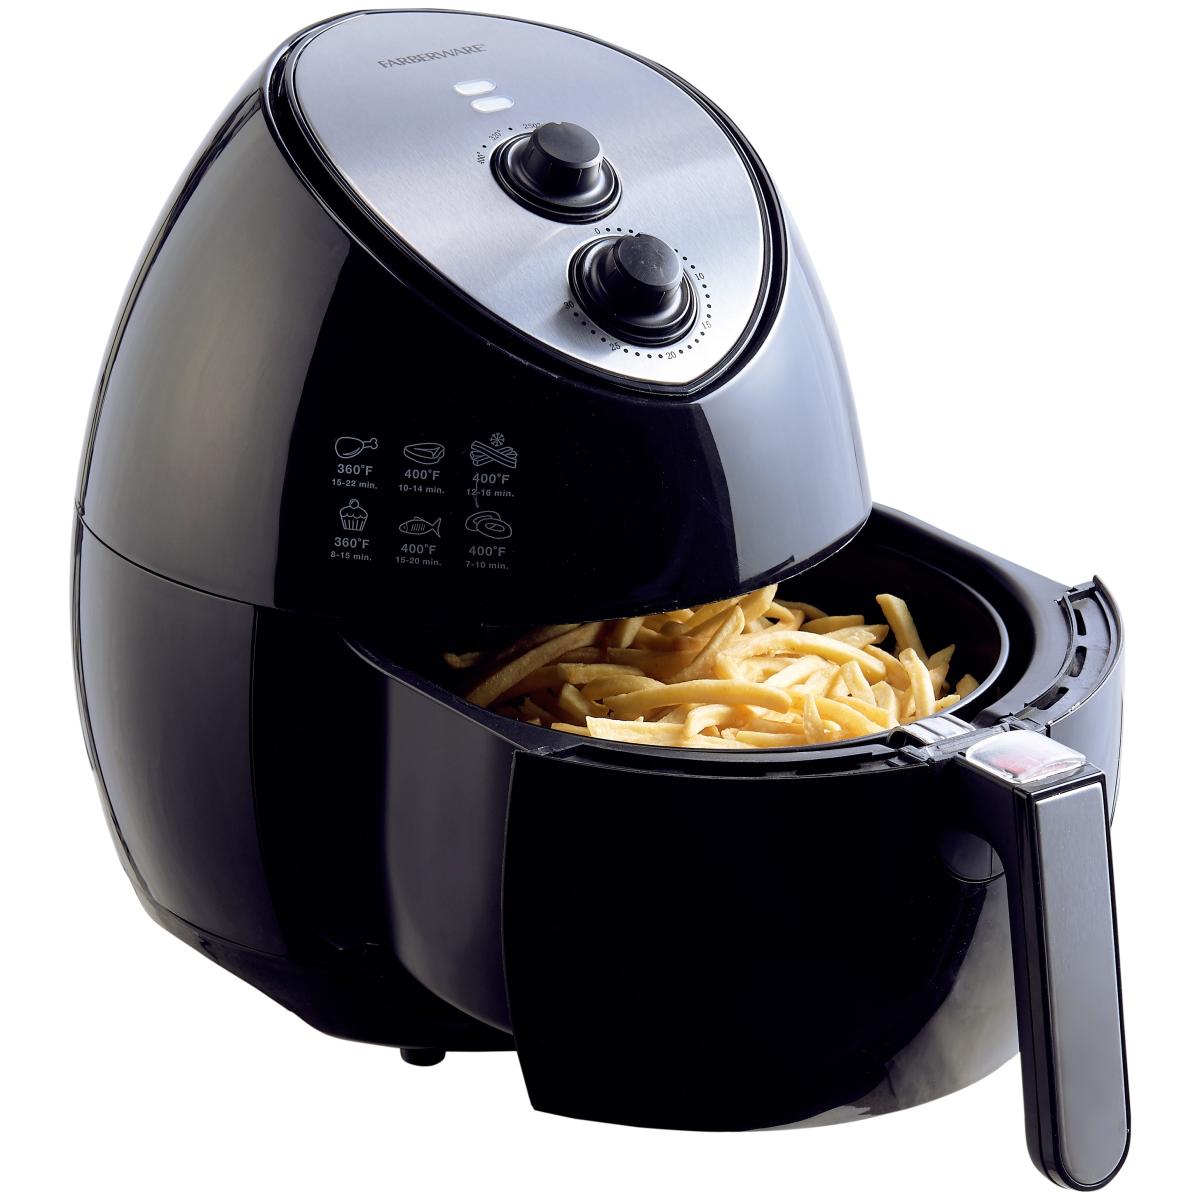 10 Air Fryer Deals From Walmart, Best Buy and More That  Can't Match  - CNET